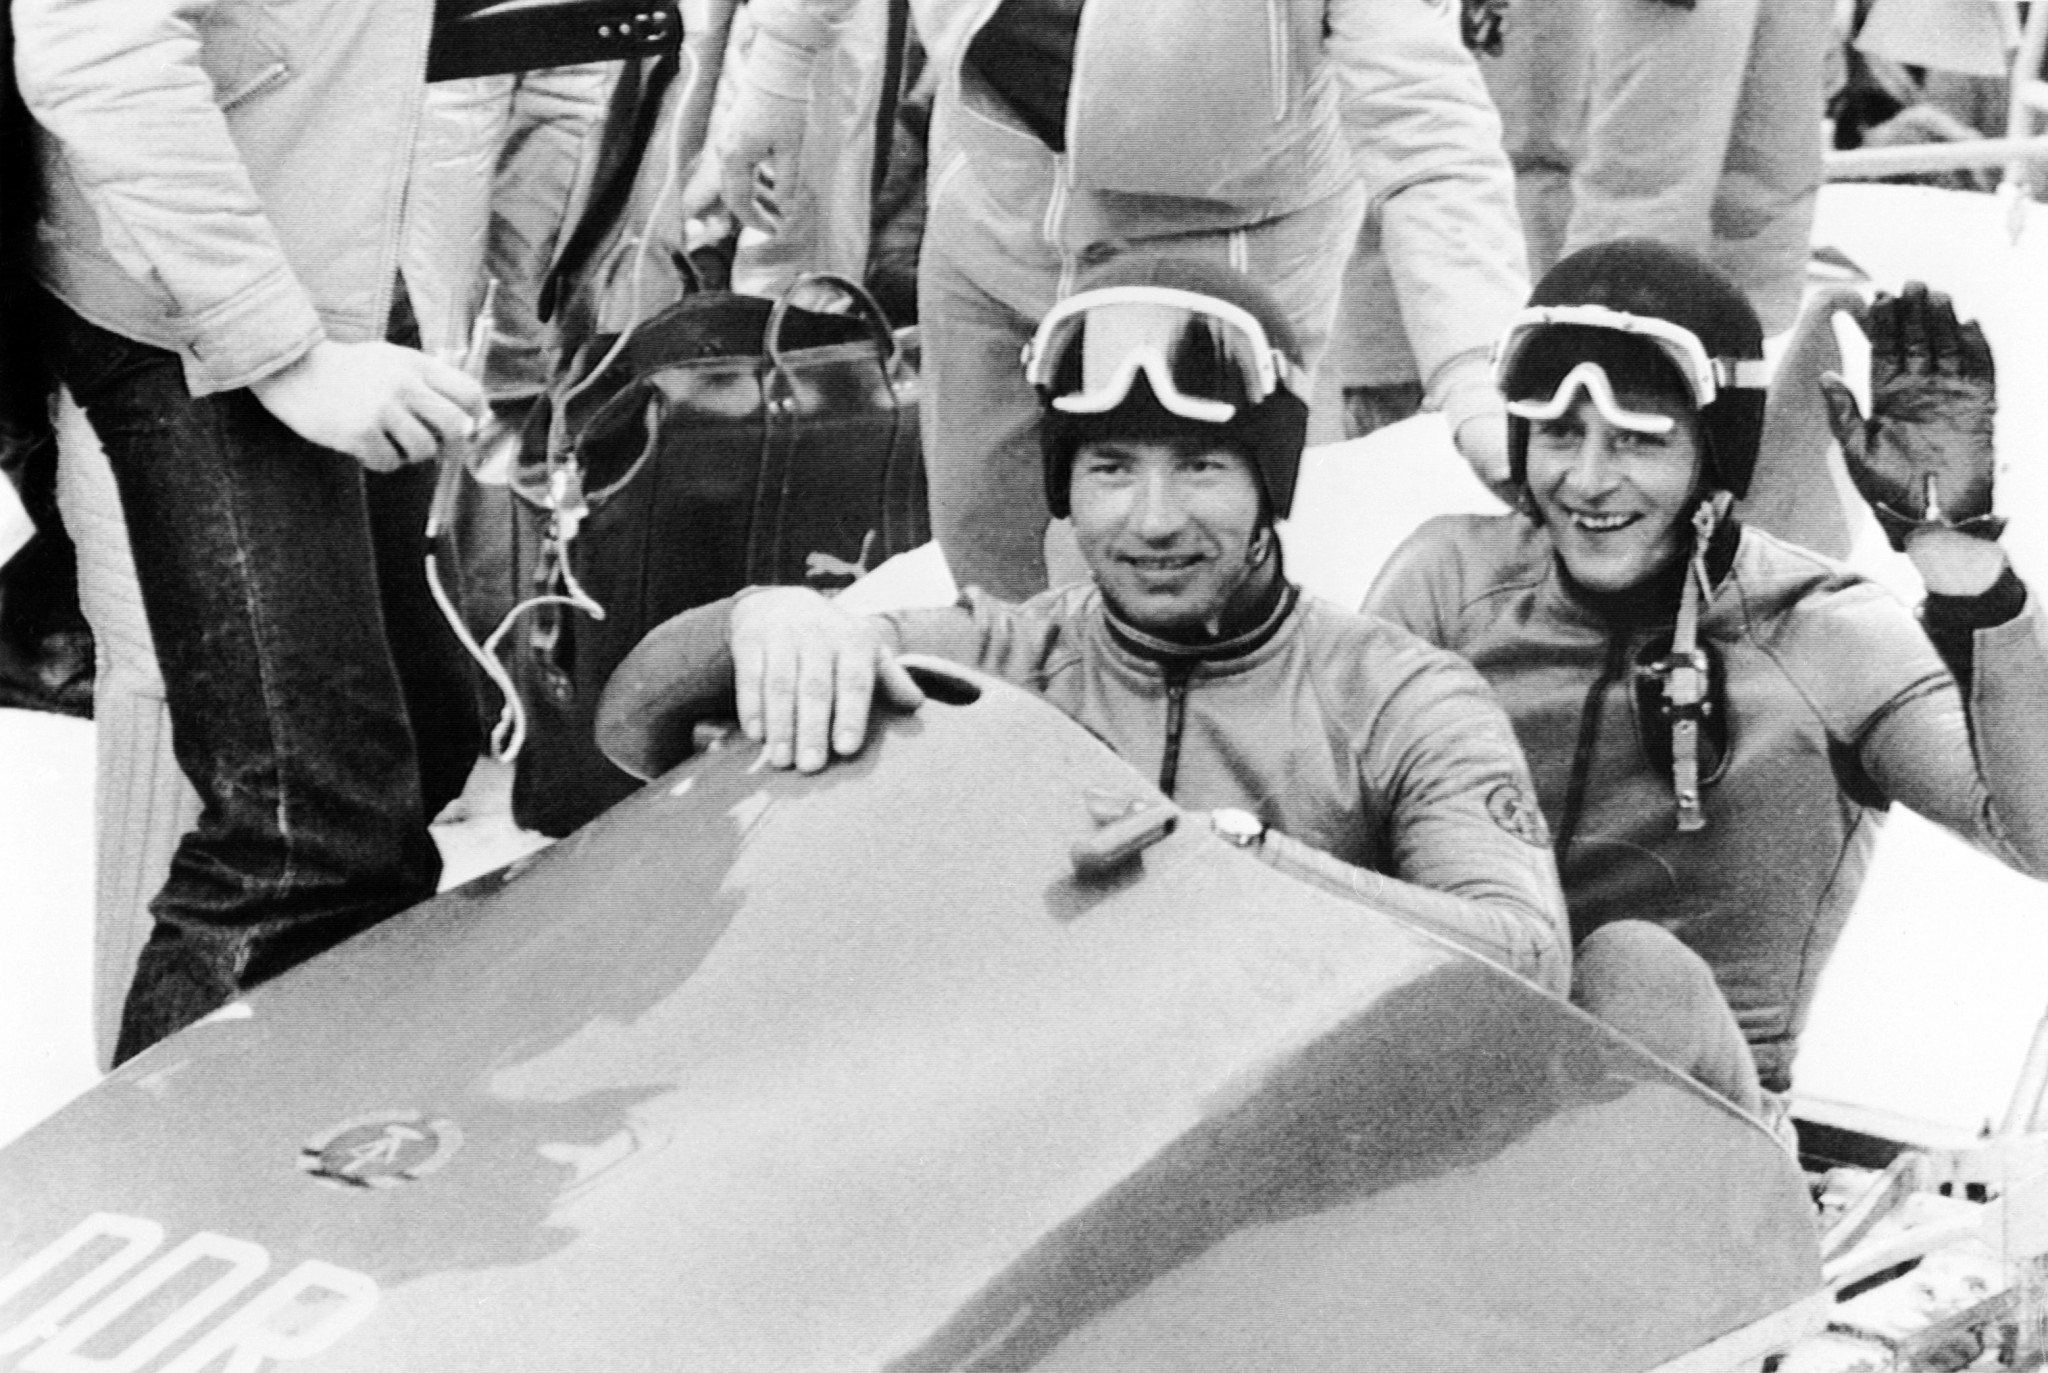 Bernhard Germeshausen, right, won two-man bobsleigh gold for East Germany at the Innsbruck 1976 Winter Olympics with pilot Meinhard Nehmer, left ©Getty Images